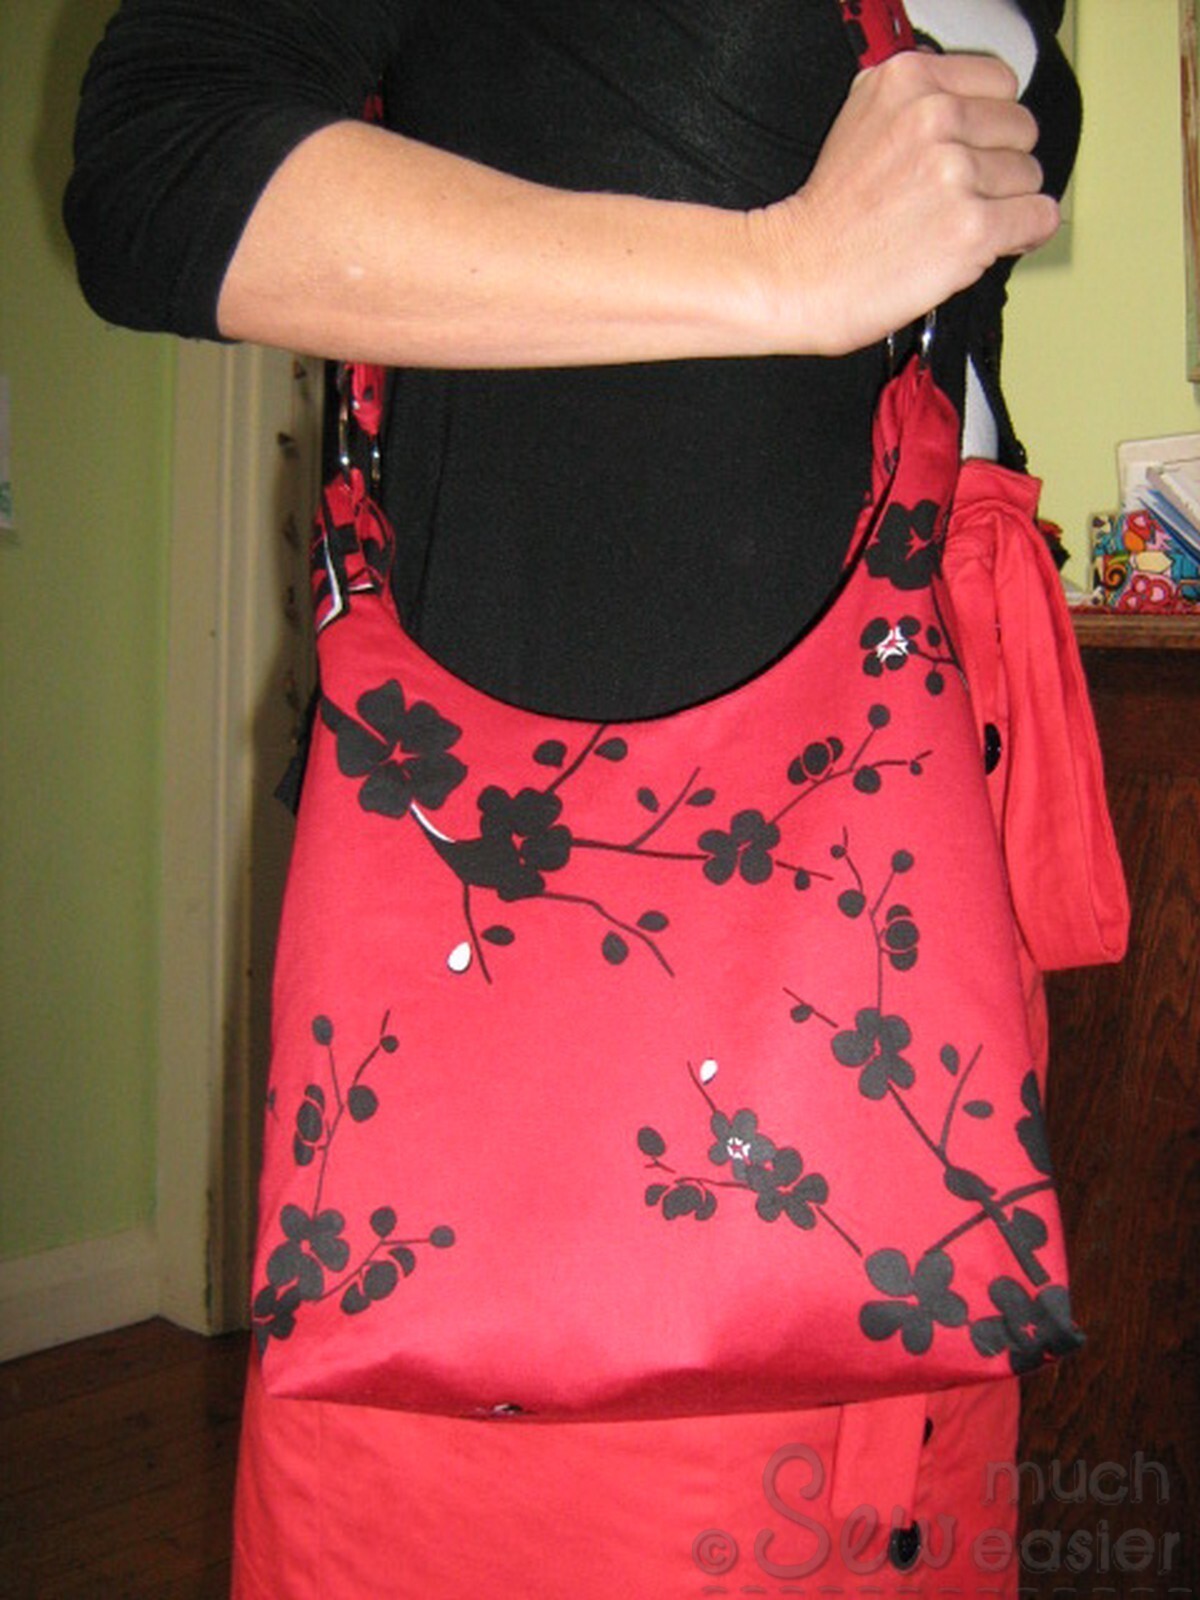 Sling Bag Pattern by You Sew Girl